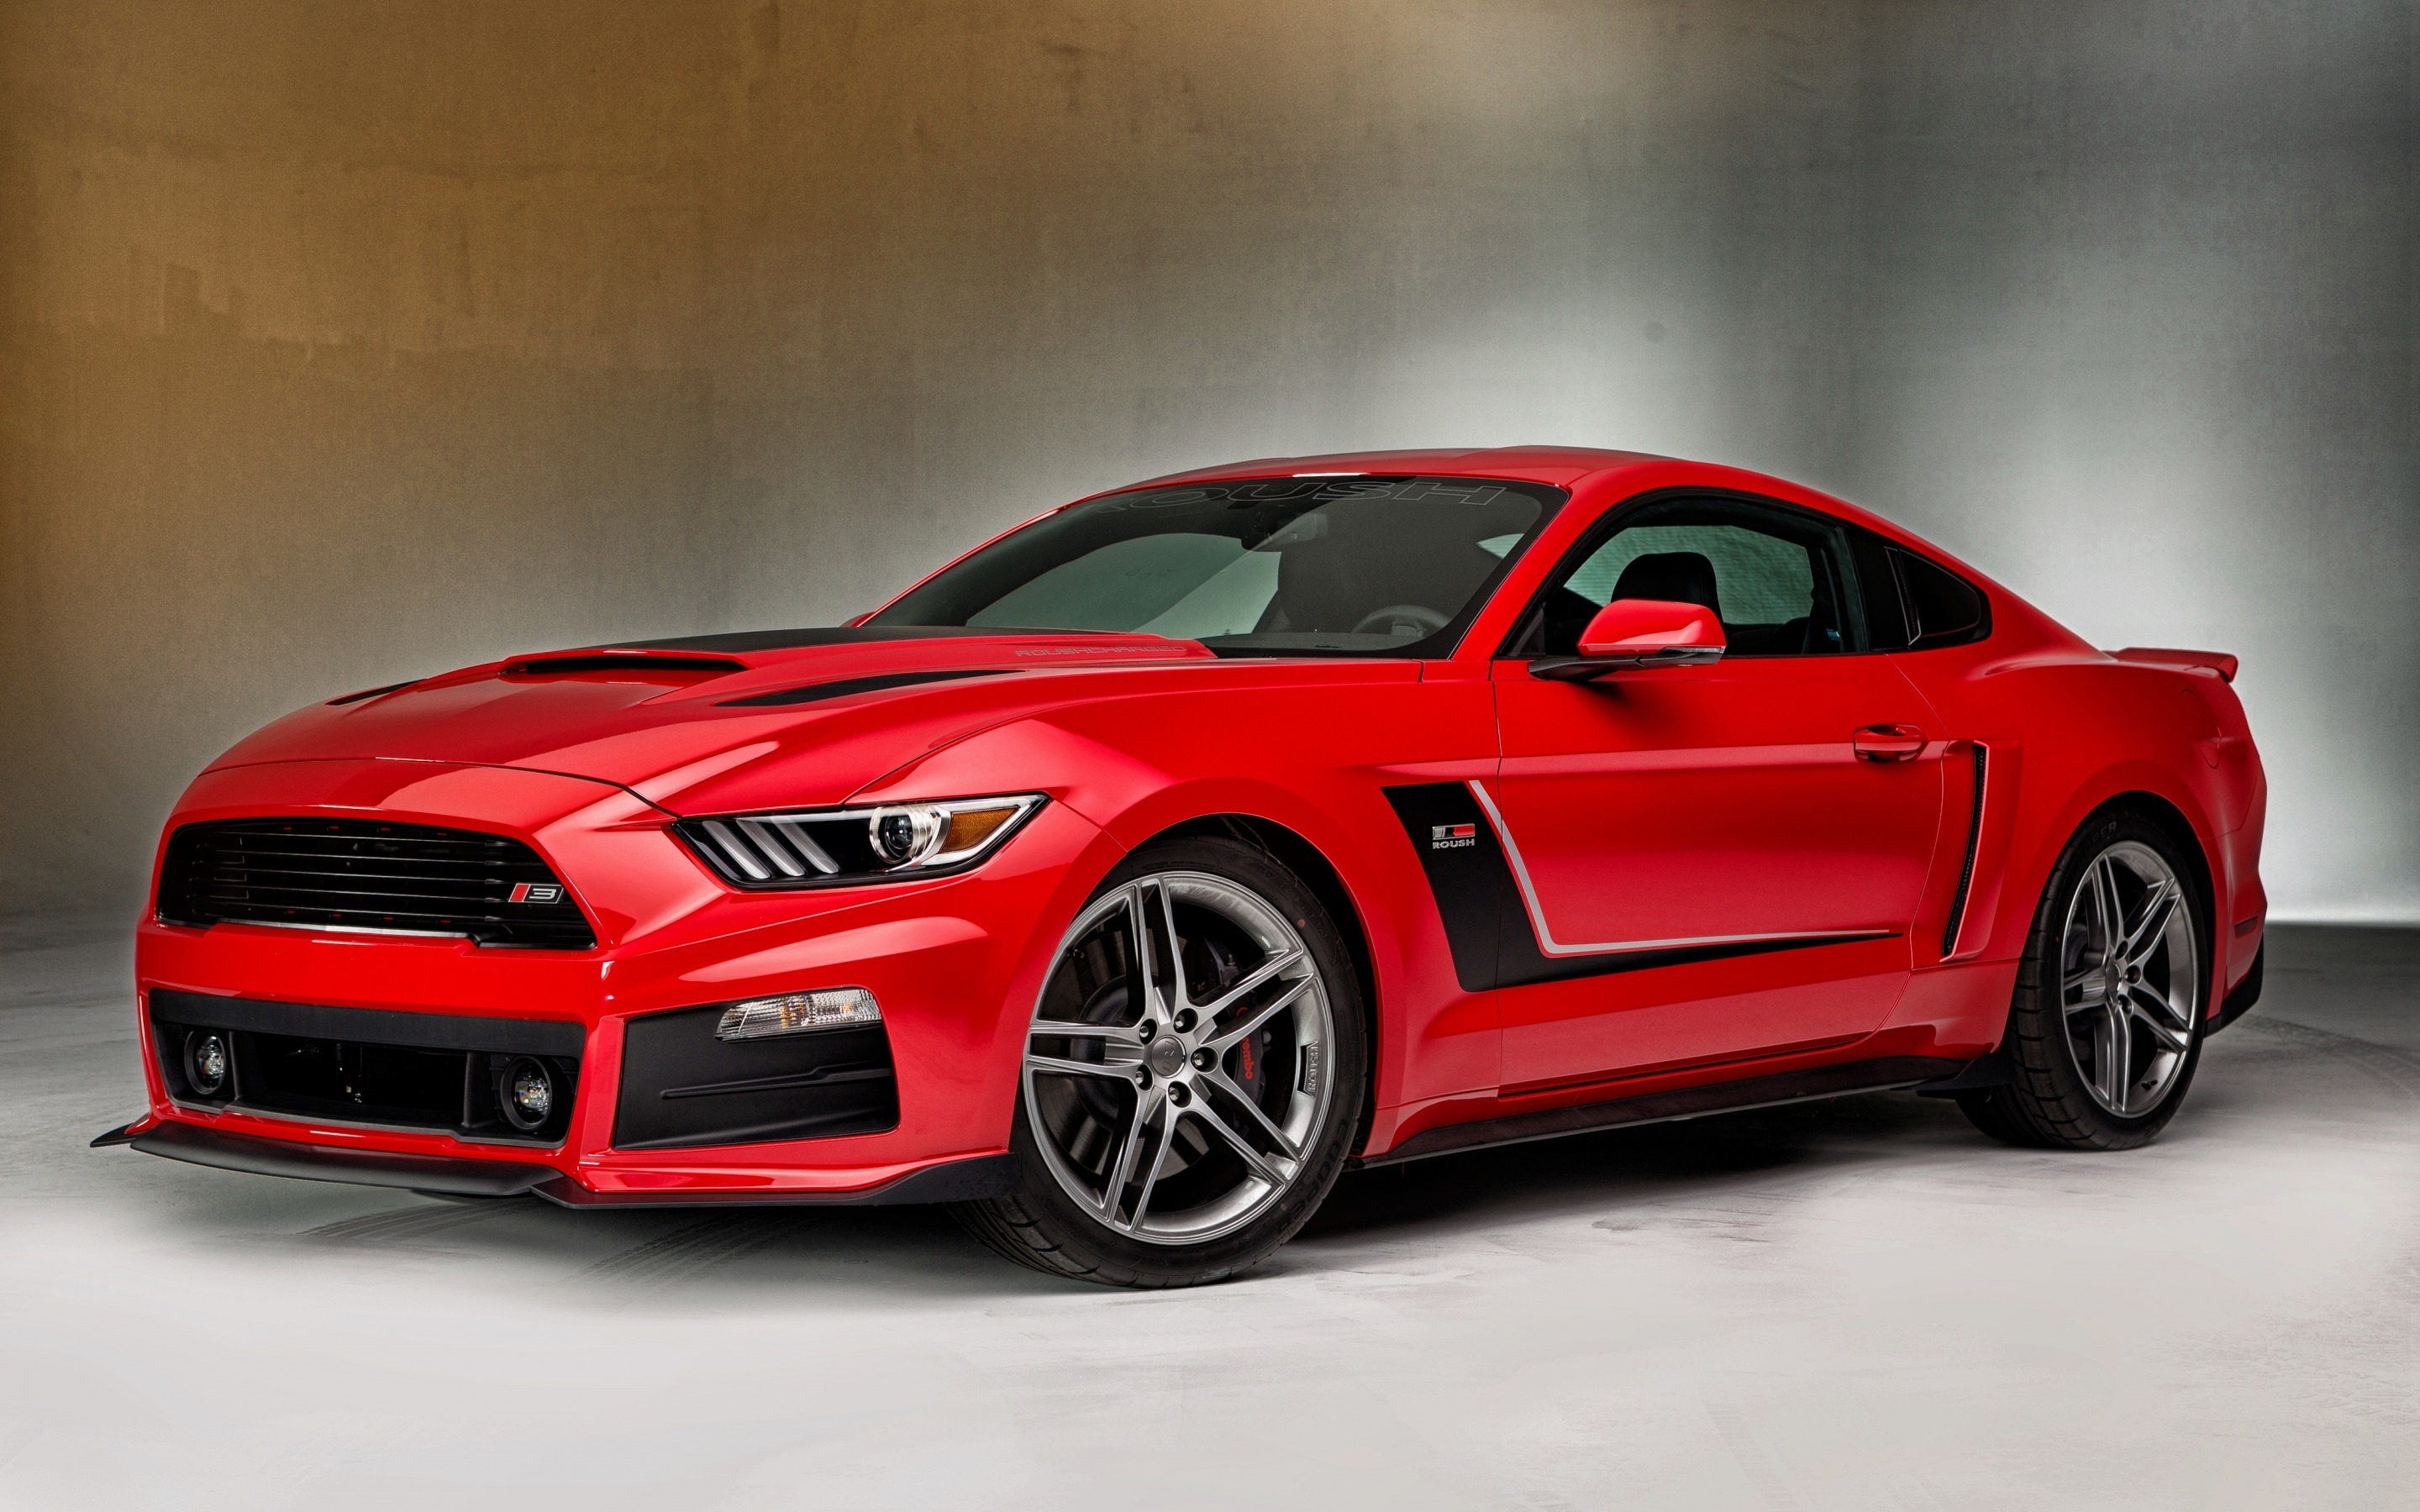 Gourgeous Red Ford Mustang Wallpaper Cars Wallpaper Better